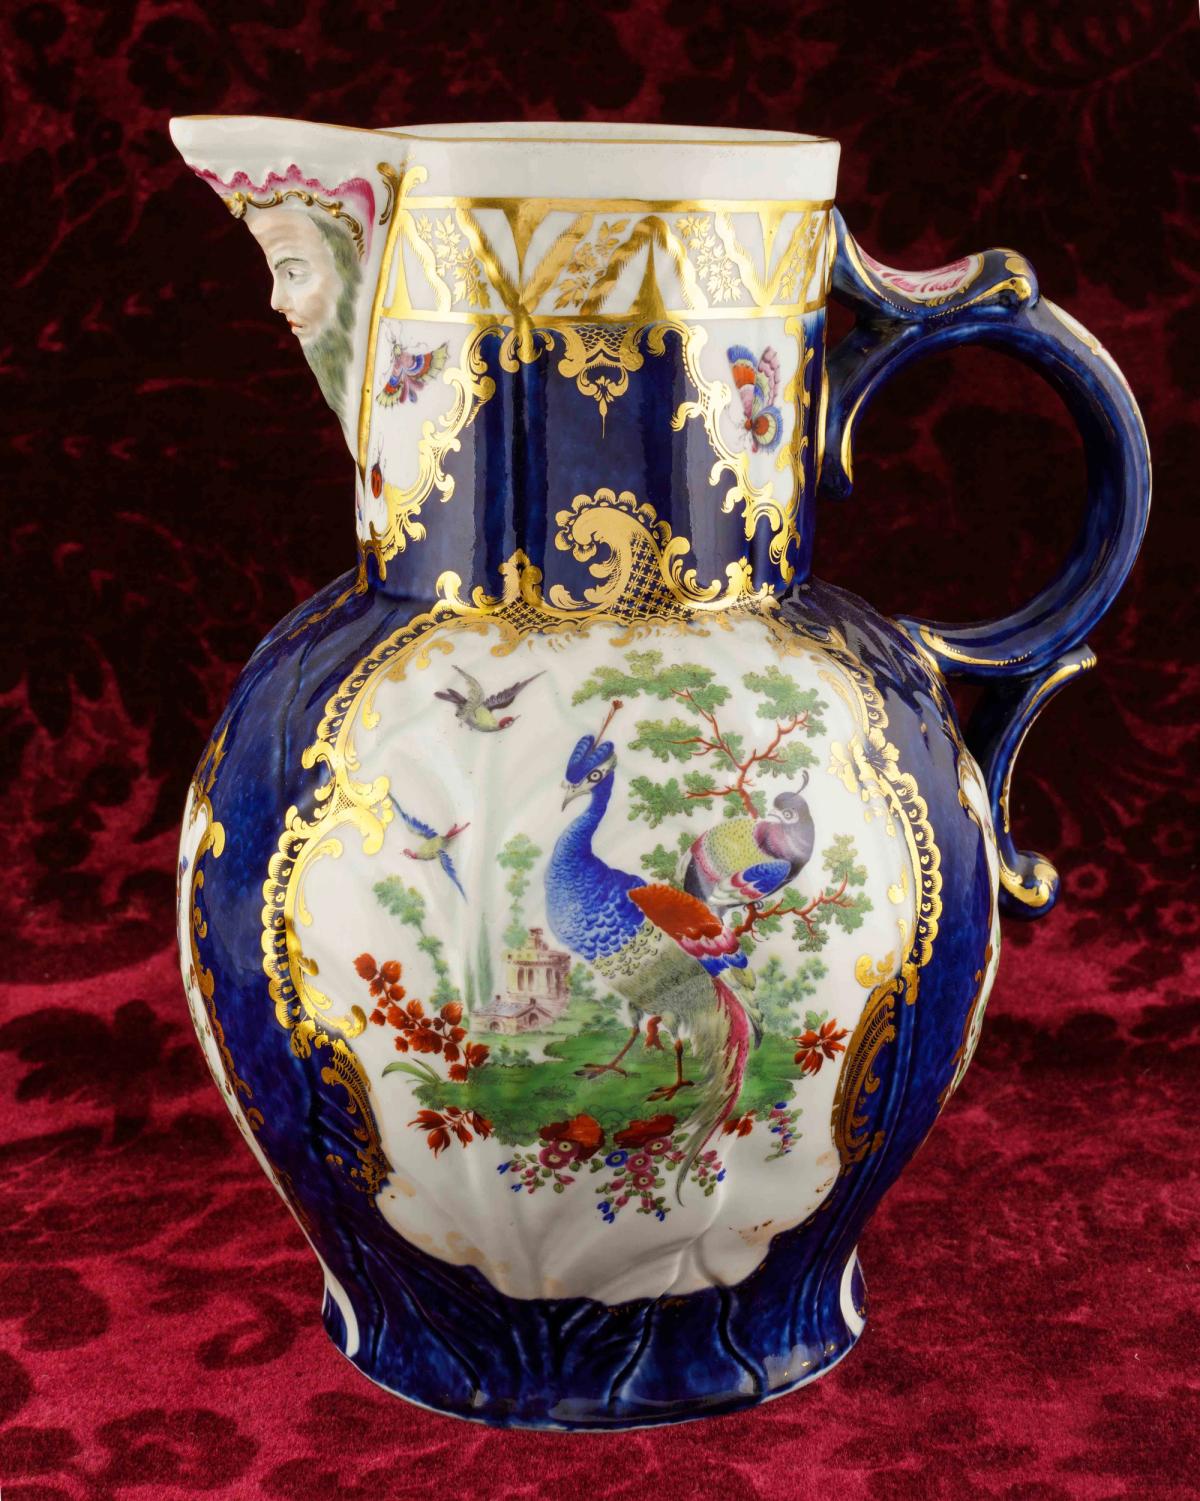 A Worcester porcelain Dutch jug decorated in Lady Betty Cobbe’s “Peacock” pattern (after 1763) Courtesy of the Cobbe Collection. Photography by Alexey Moskvin